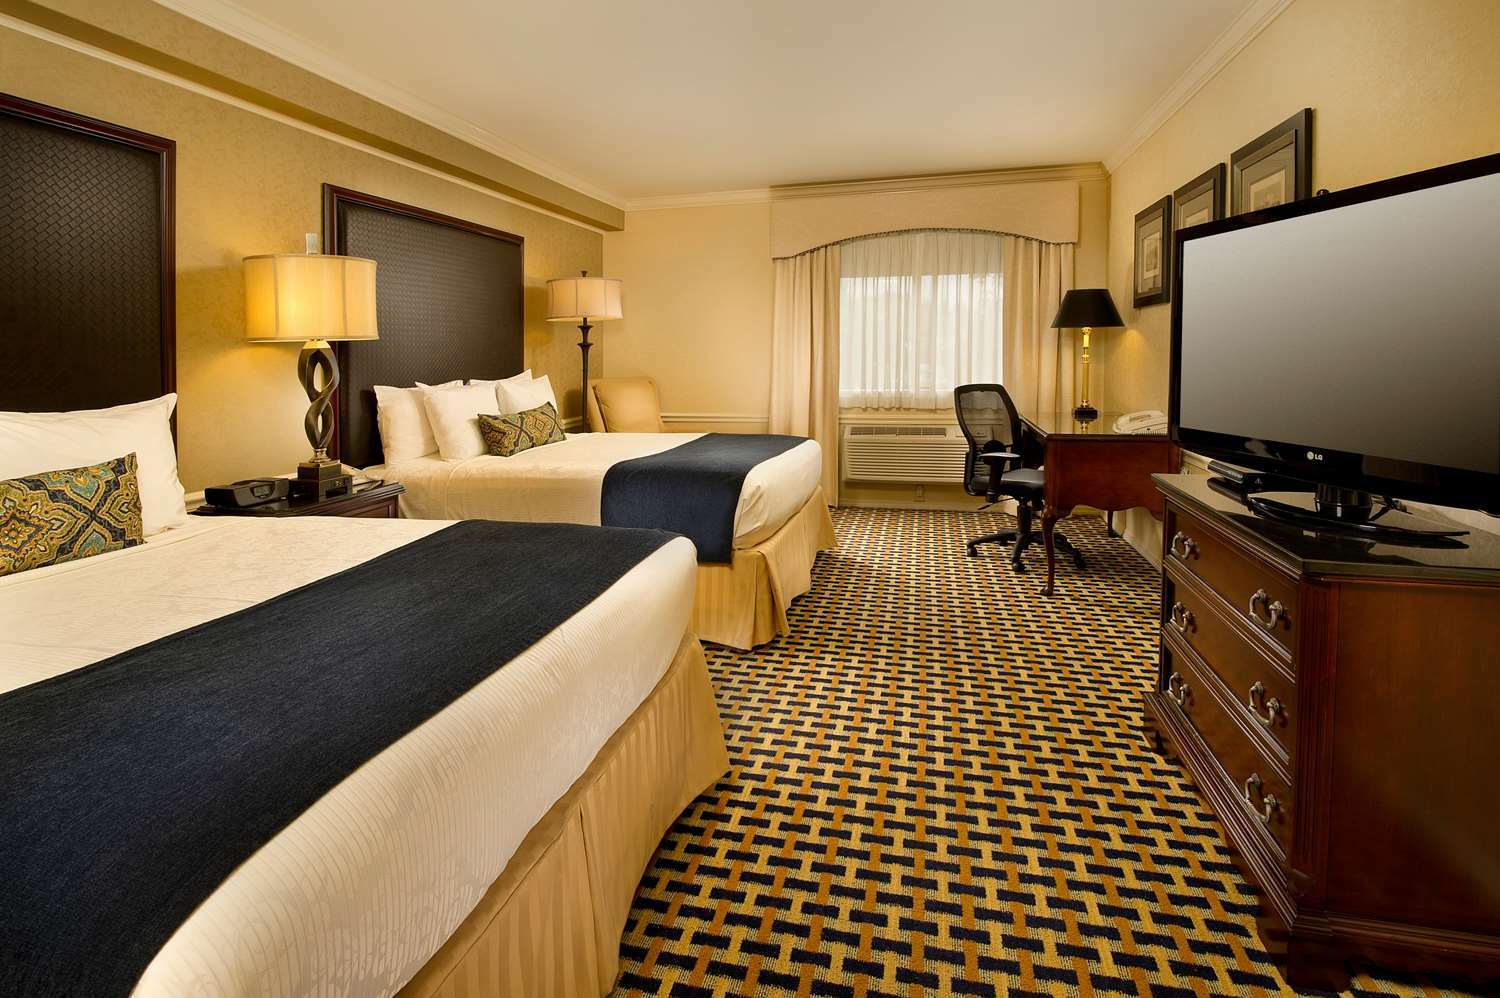 Photo of Best Western Premier Plaza Hotel & Conference Center, Puyallup, WA